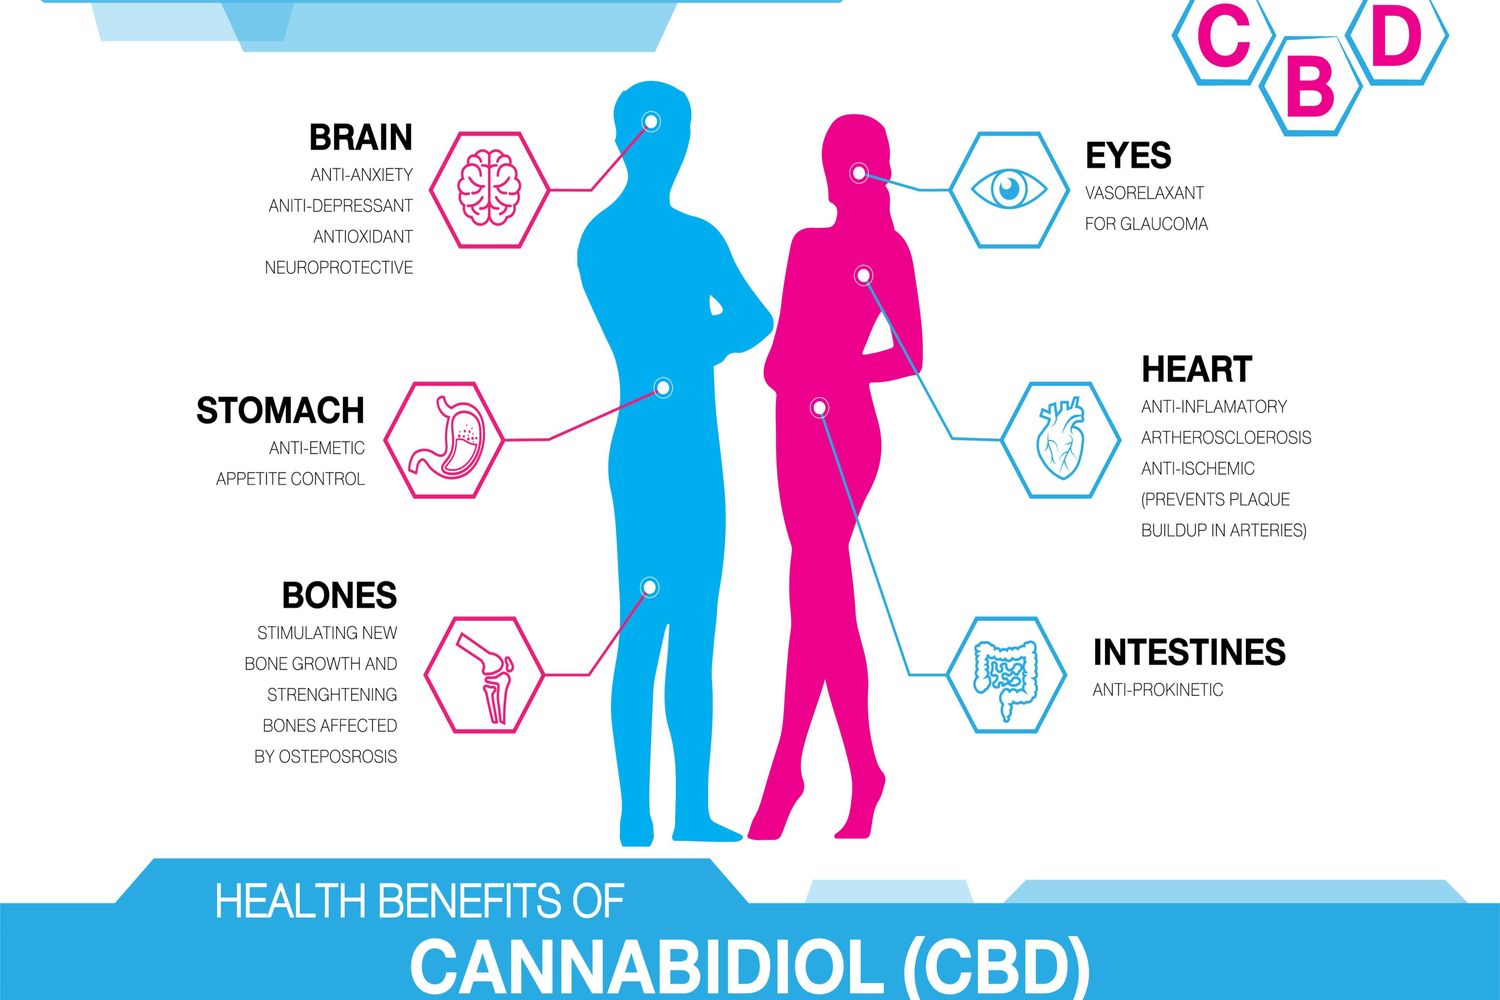 CBD also benefits the physical body such as your brain, stomach, bones, eyes, heart and intestines.